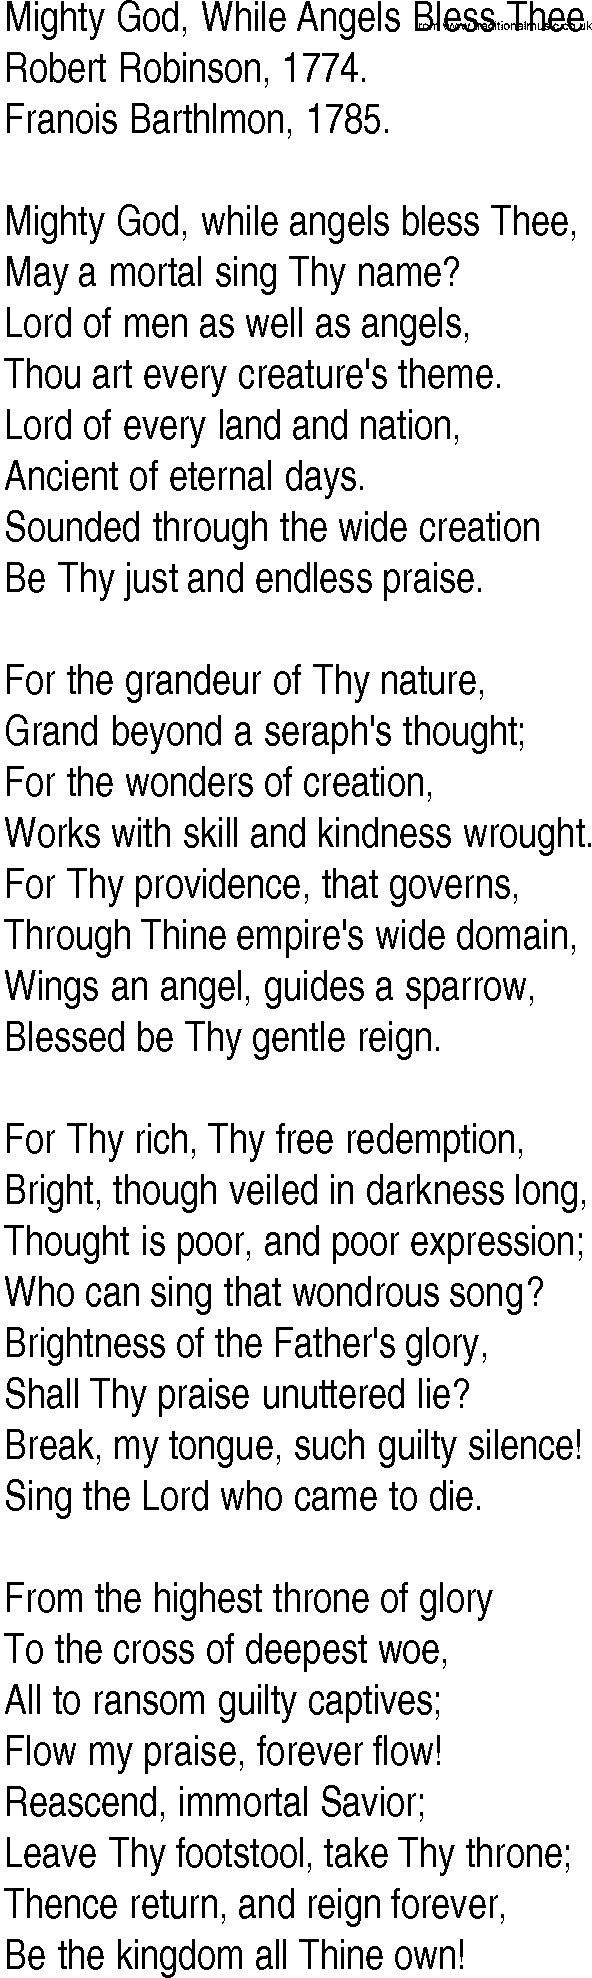 Hymn and Gospel Song: Mighty God, While Angels Bless Thee by Robert Robinson lyrics